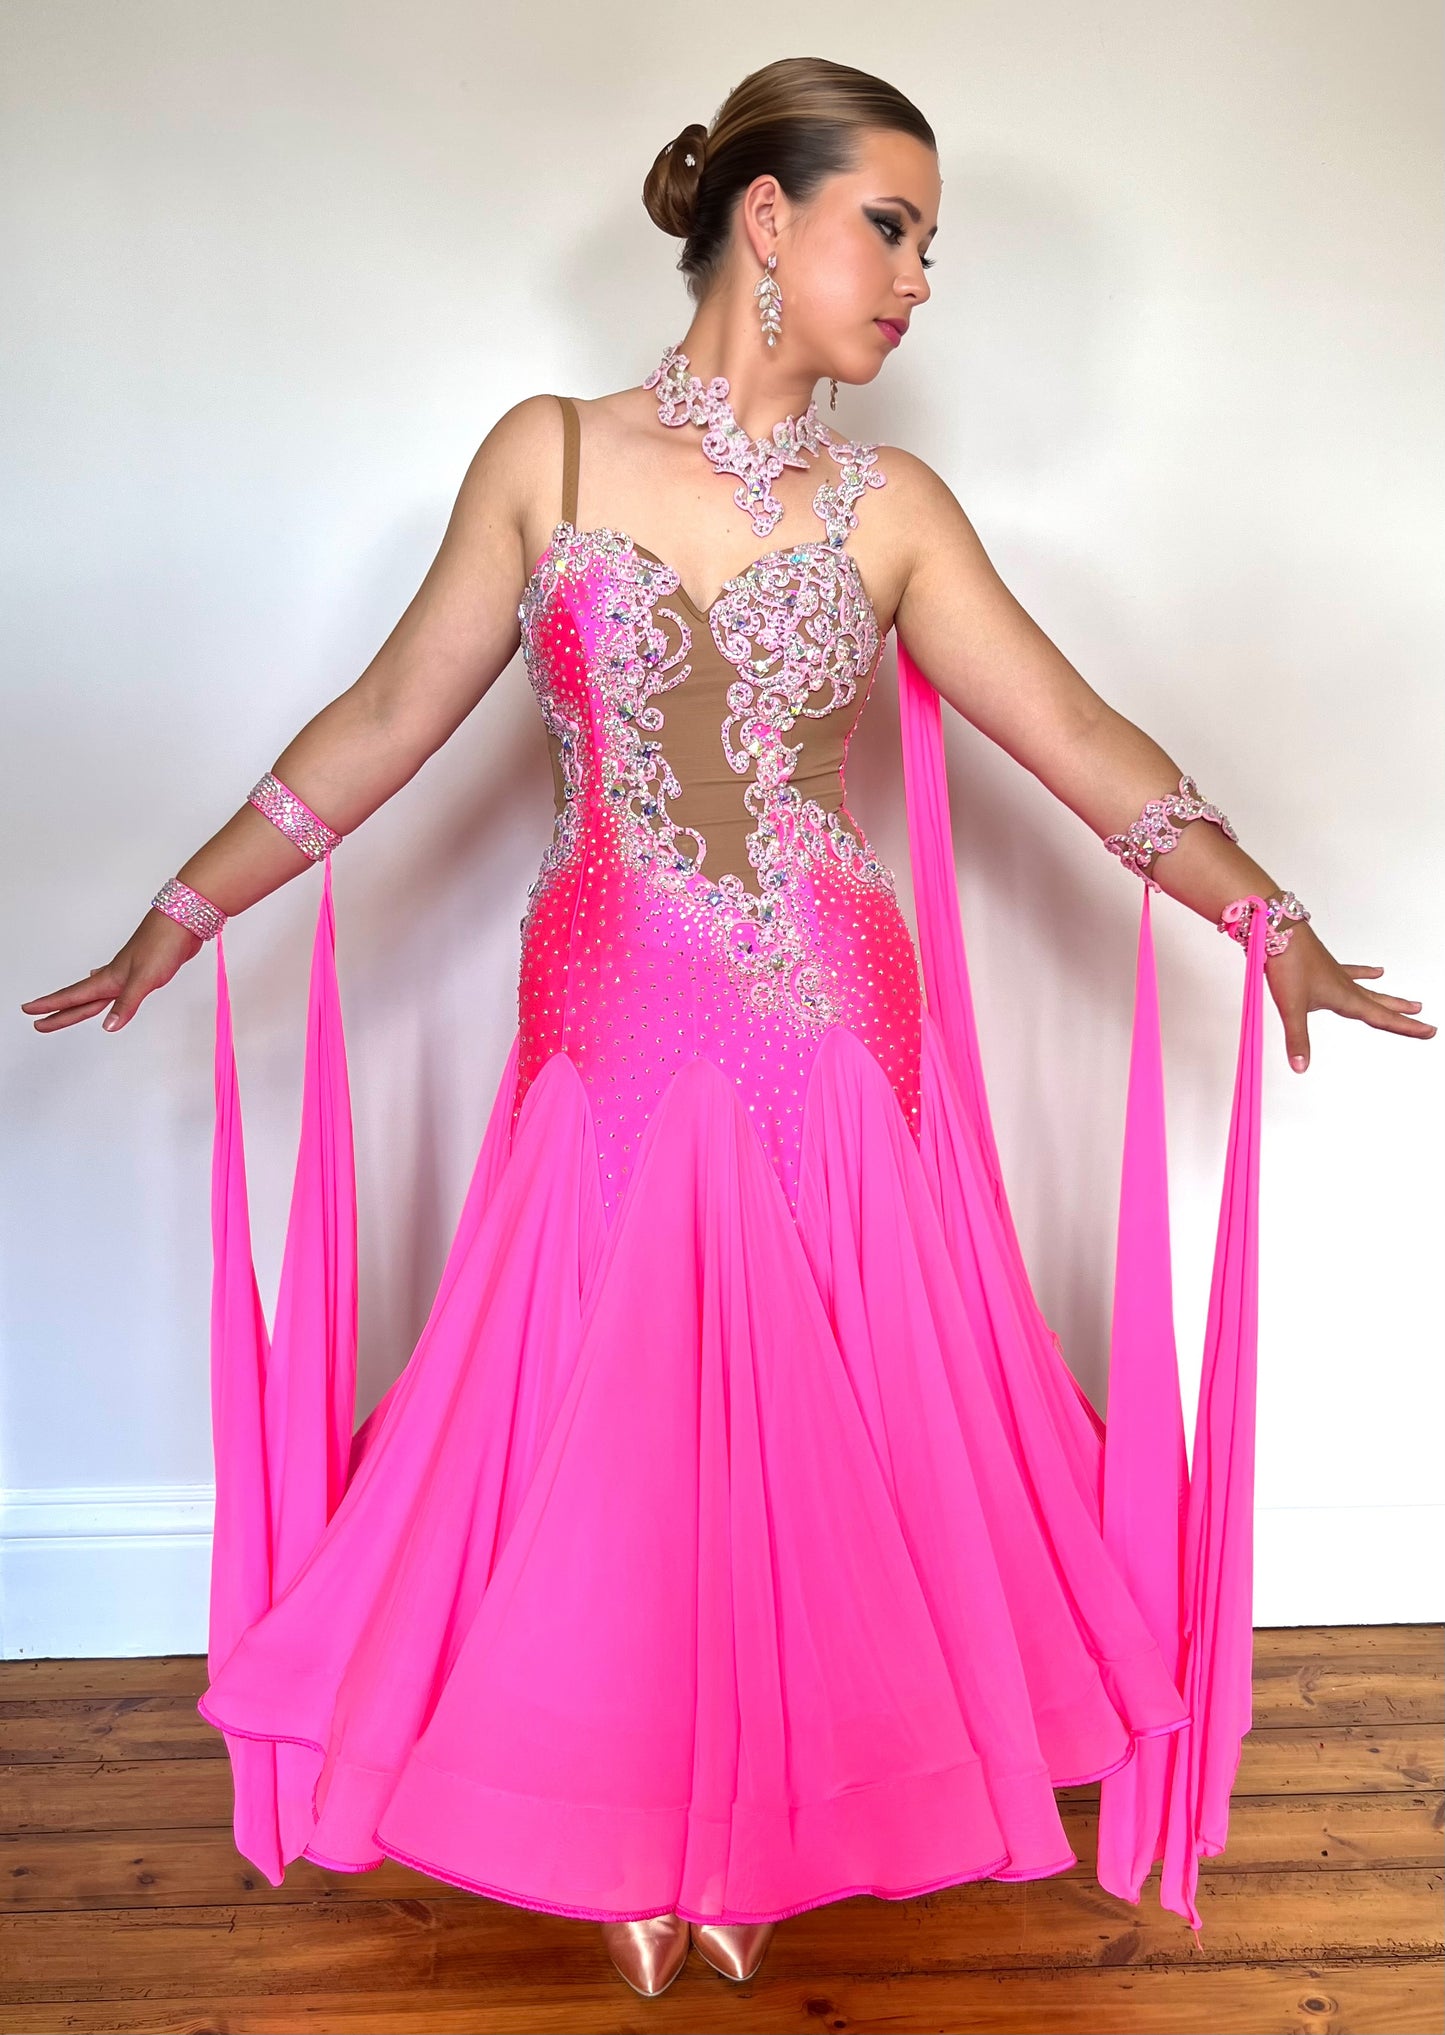 033 Hot Flo Pink heavily decorated Ballroom Dress. Heavily stoned in AB with open back. Comes with a lot of accessories, bands & floats.